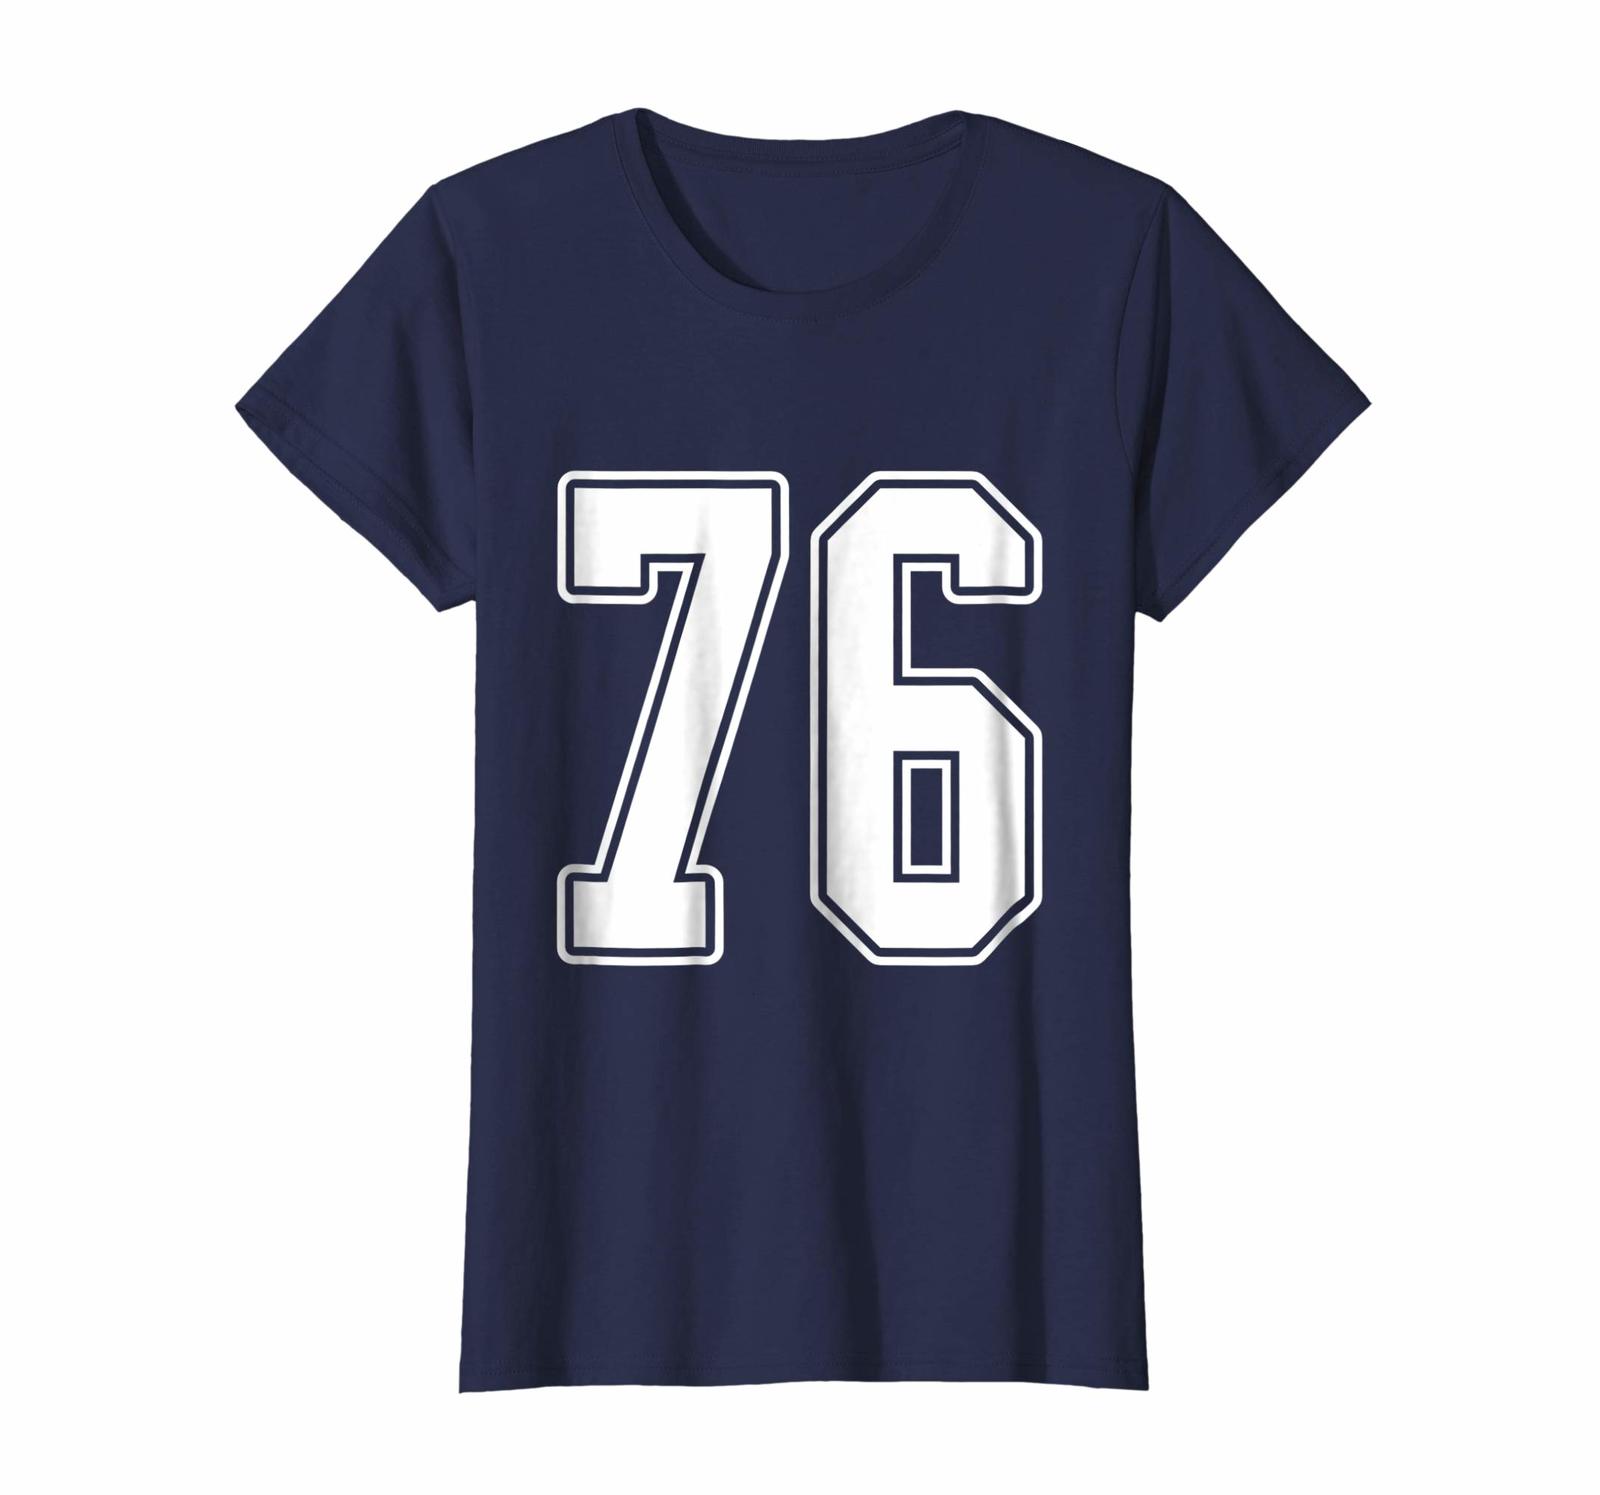 Funny Shirts - #76 White Outline Number 76 Sports Fan Jersey Style T ...